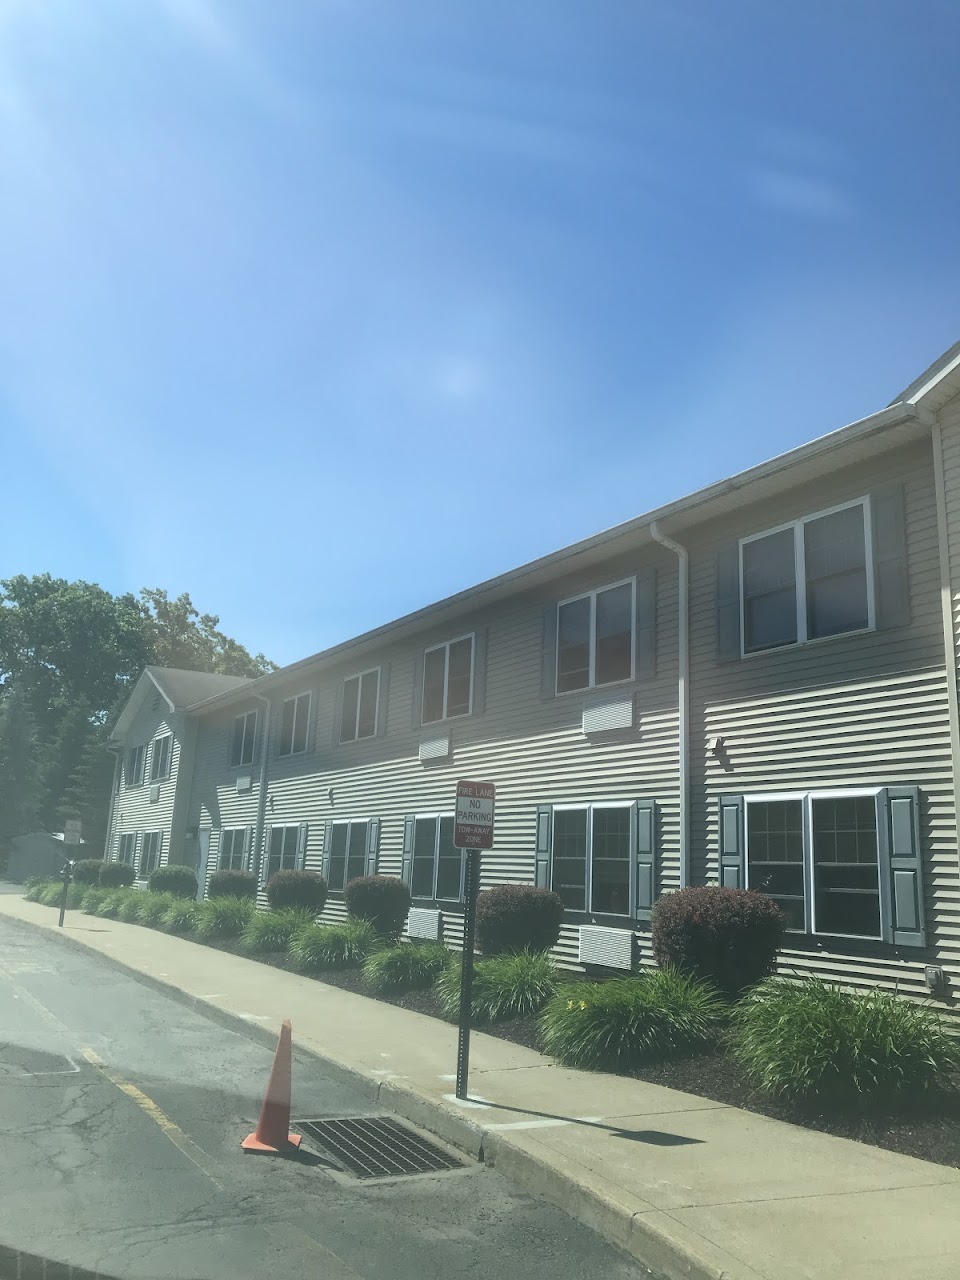 Photo of DUNMORE SENIOR HOUSING. Affordable housing located at 5 KNOX RD SCRANTON, PA 18505